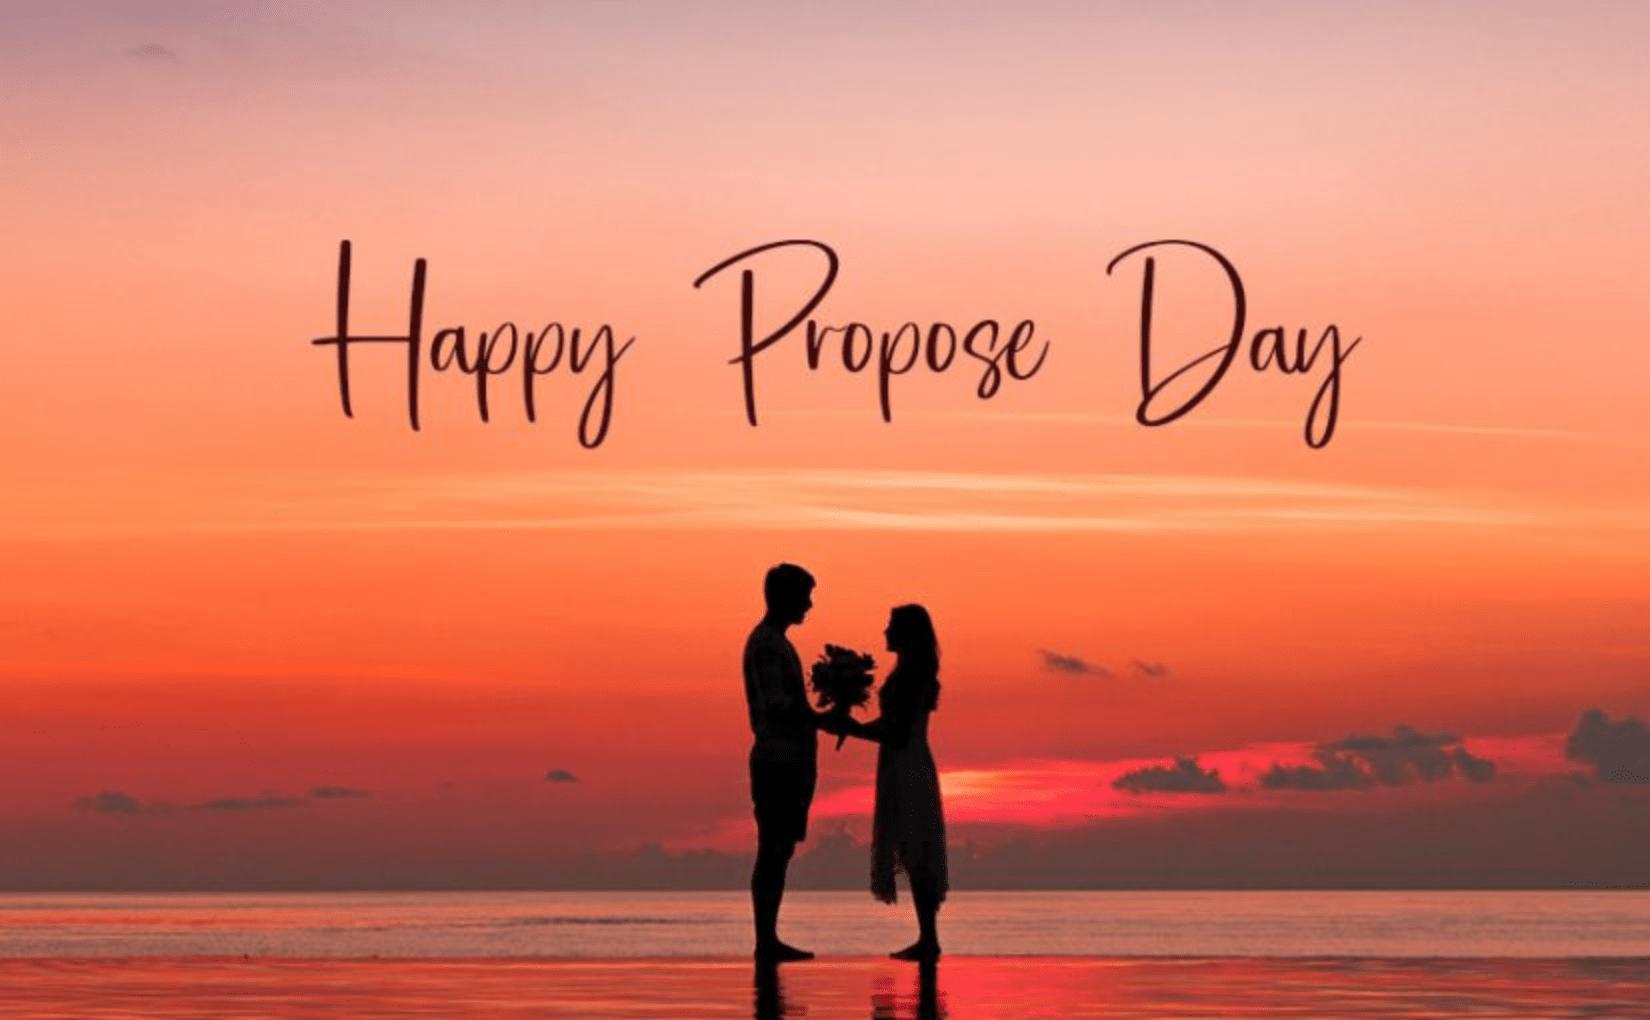 propose day 2022 pic download